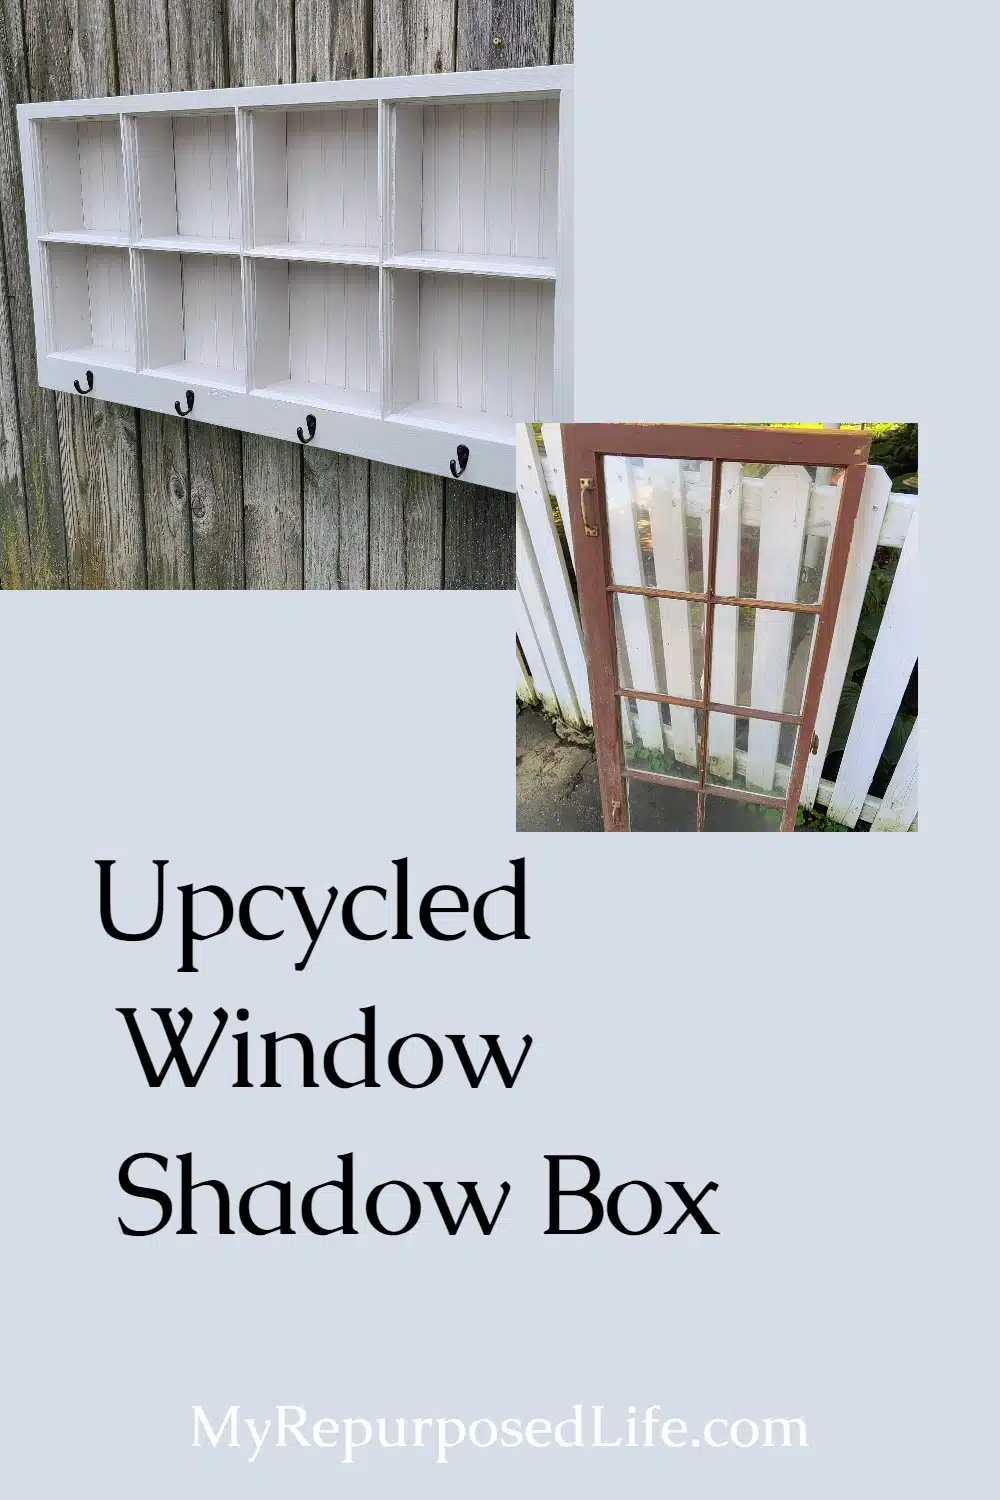 How to make a shadow box hook shelf out of new lumber and an old window. Repurposing a window into a shadow box is creative and clever! I love a great window project, and who can't use another coat rack? #MyRepurposedLife #repurposed #window #shadowbox #shelf #hooks #coatrack via @repurposedlife